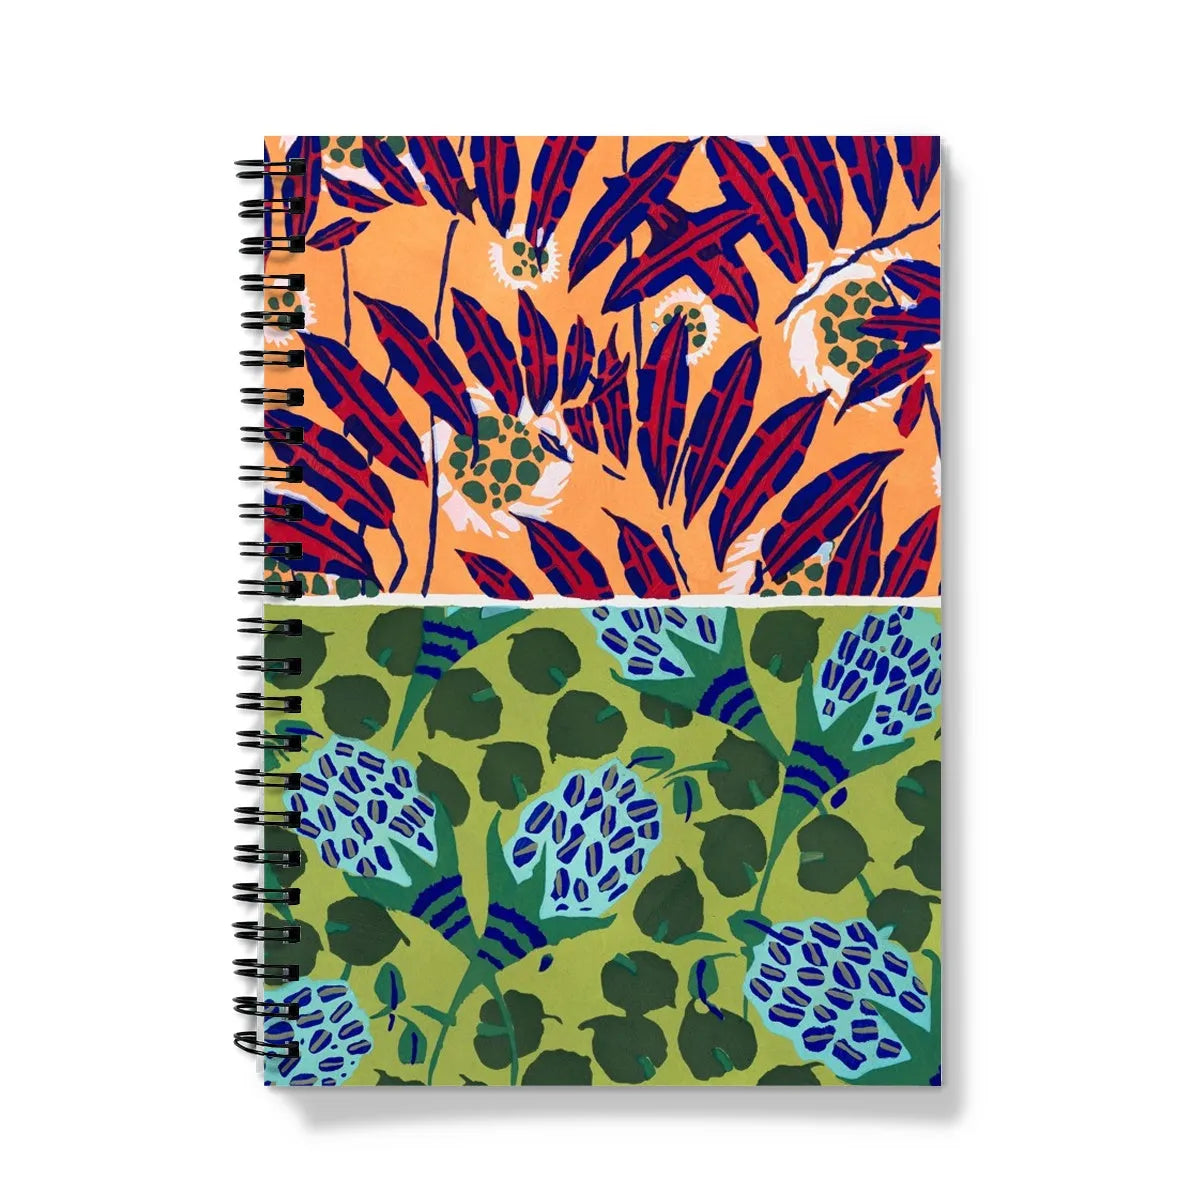 Suggestions Pour étoffes Et Tapis By E. A. Séguy Notebook - A5 / Graph - Notebooks & Notepads - Aesthetic Art